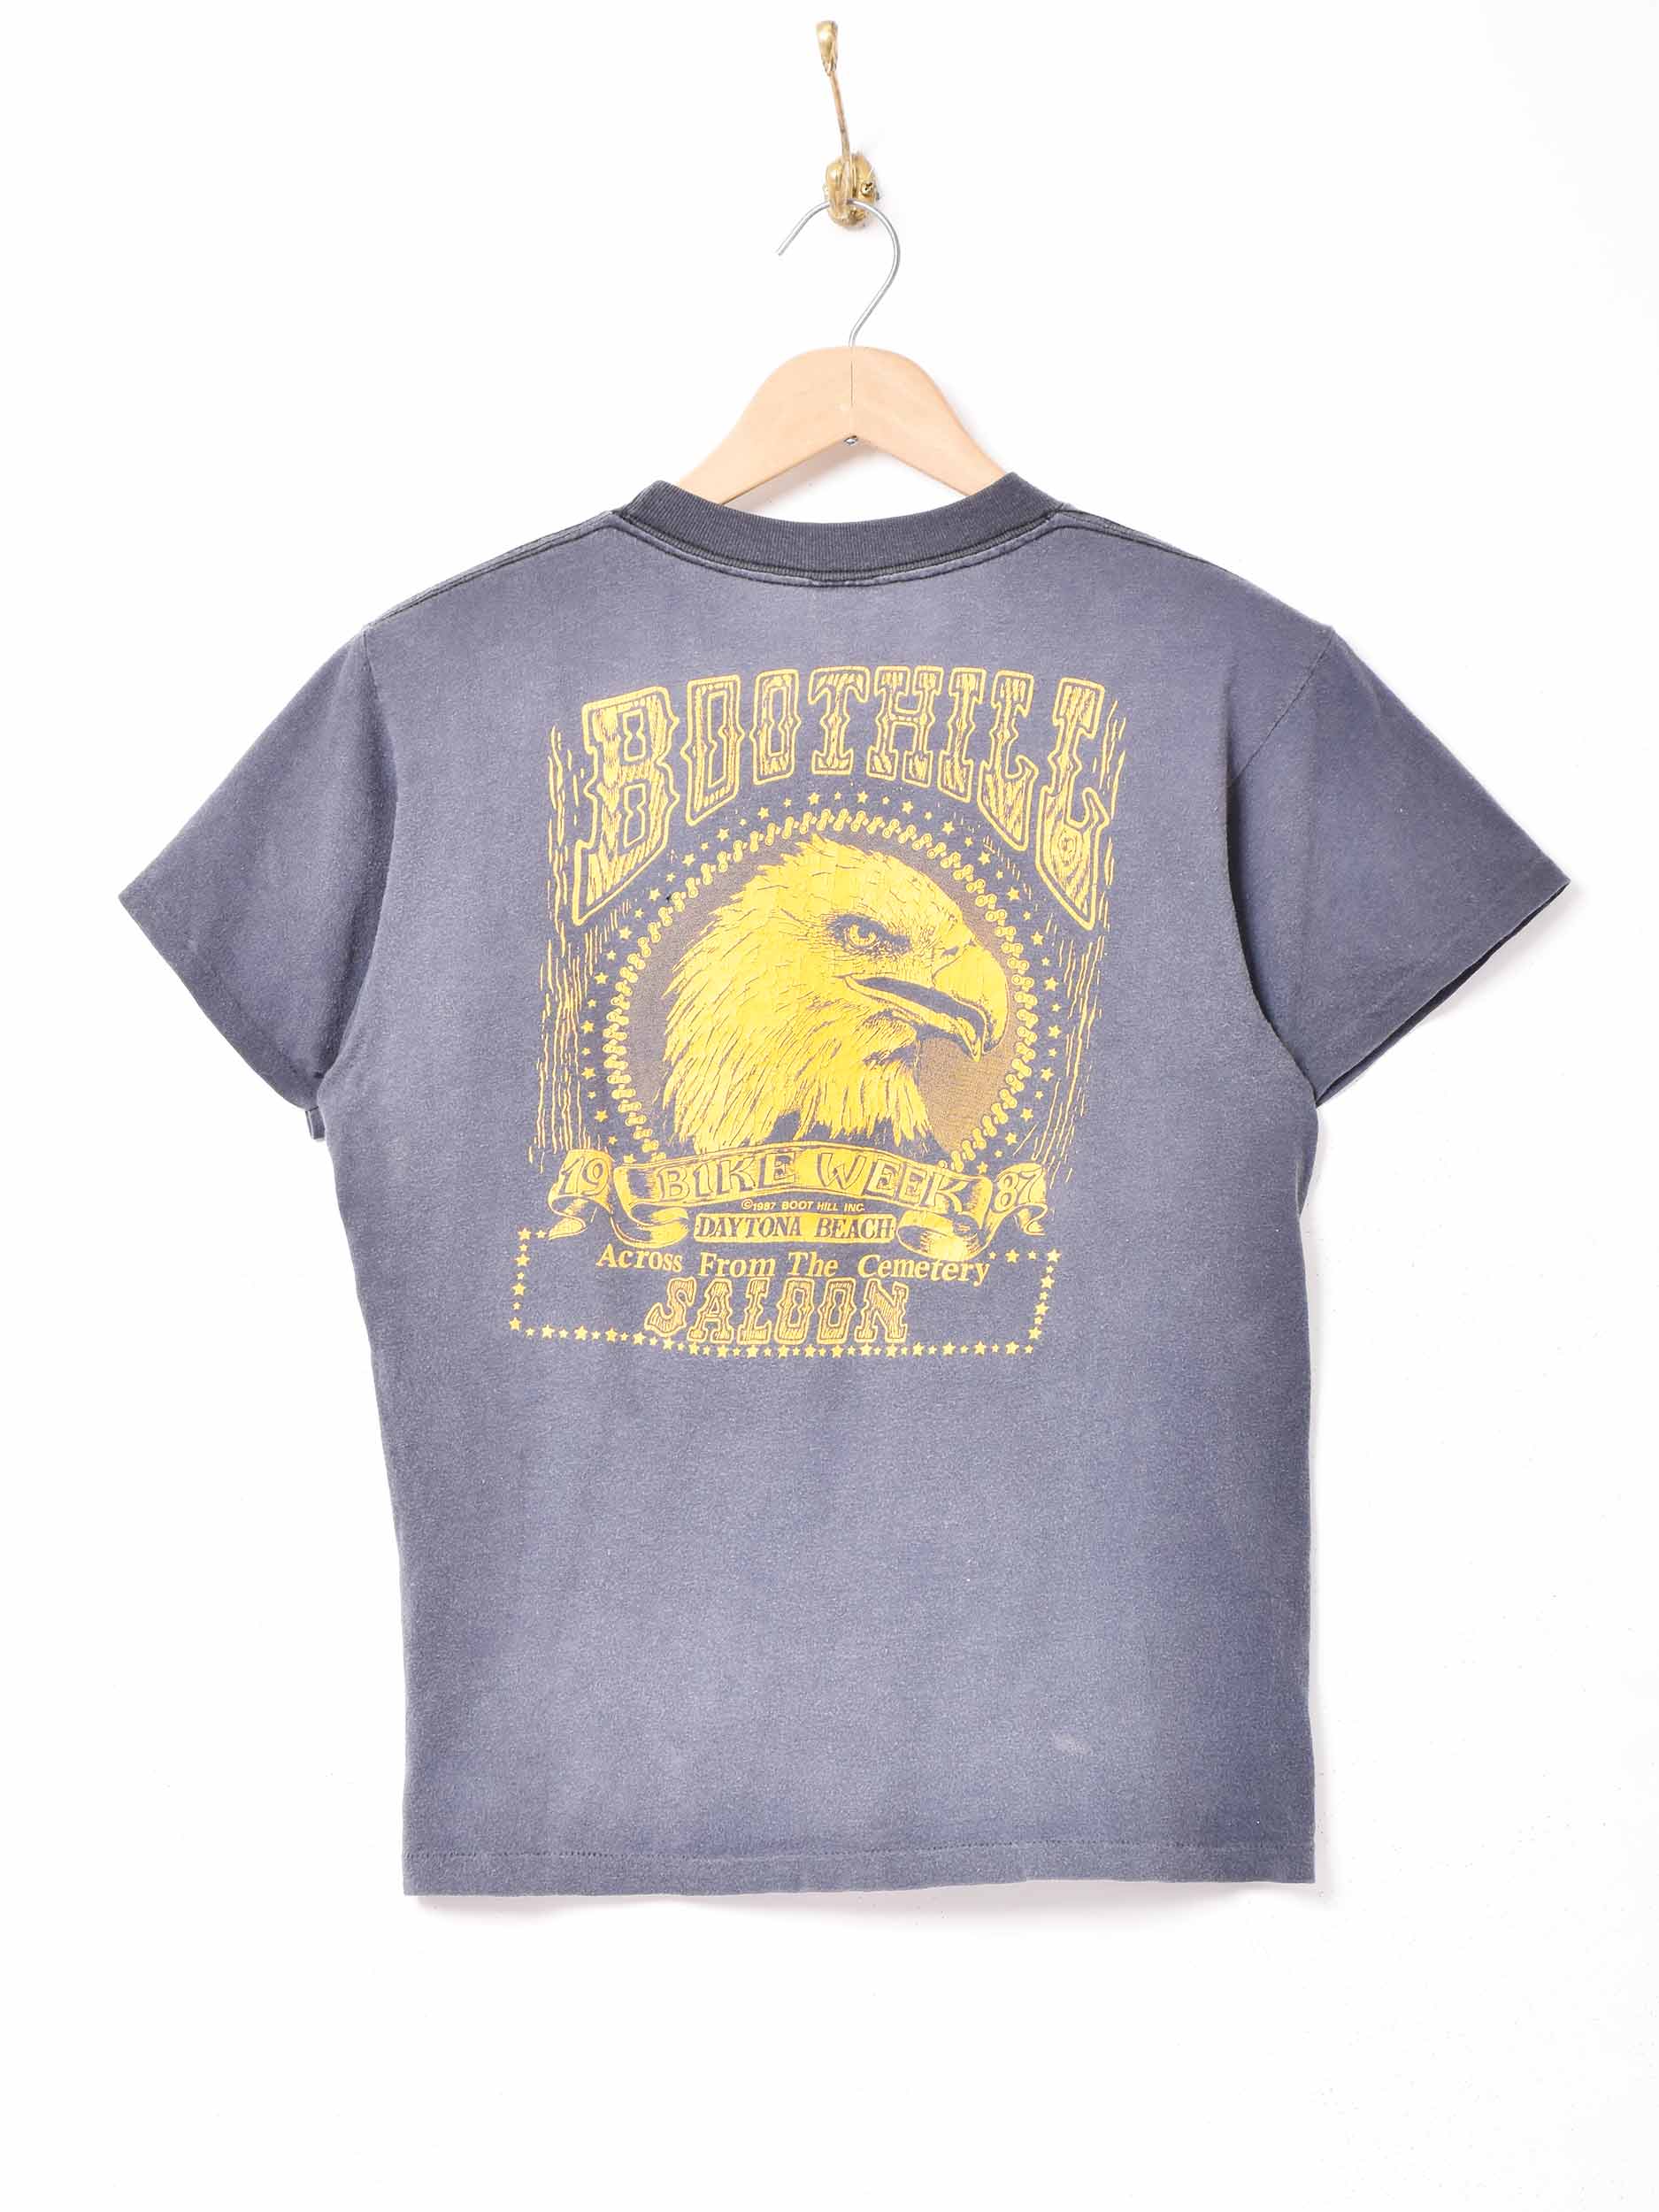 AMERICA PROJECT BOOTHILL SALOON ヴィンテージTシャツ – 古着屋Top of